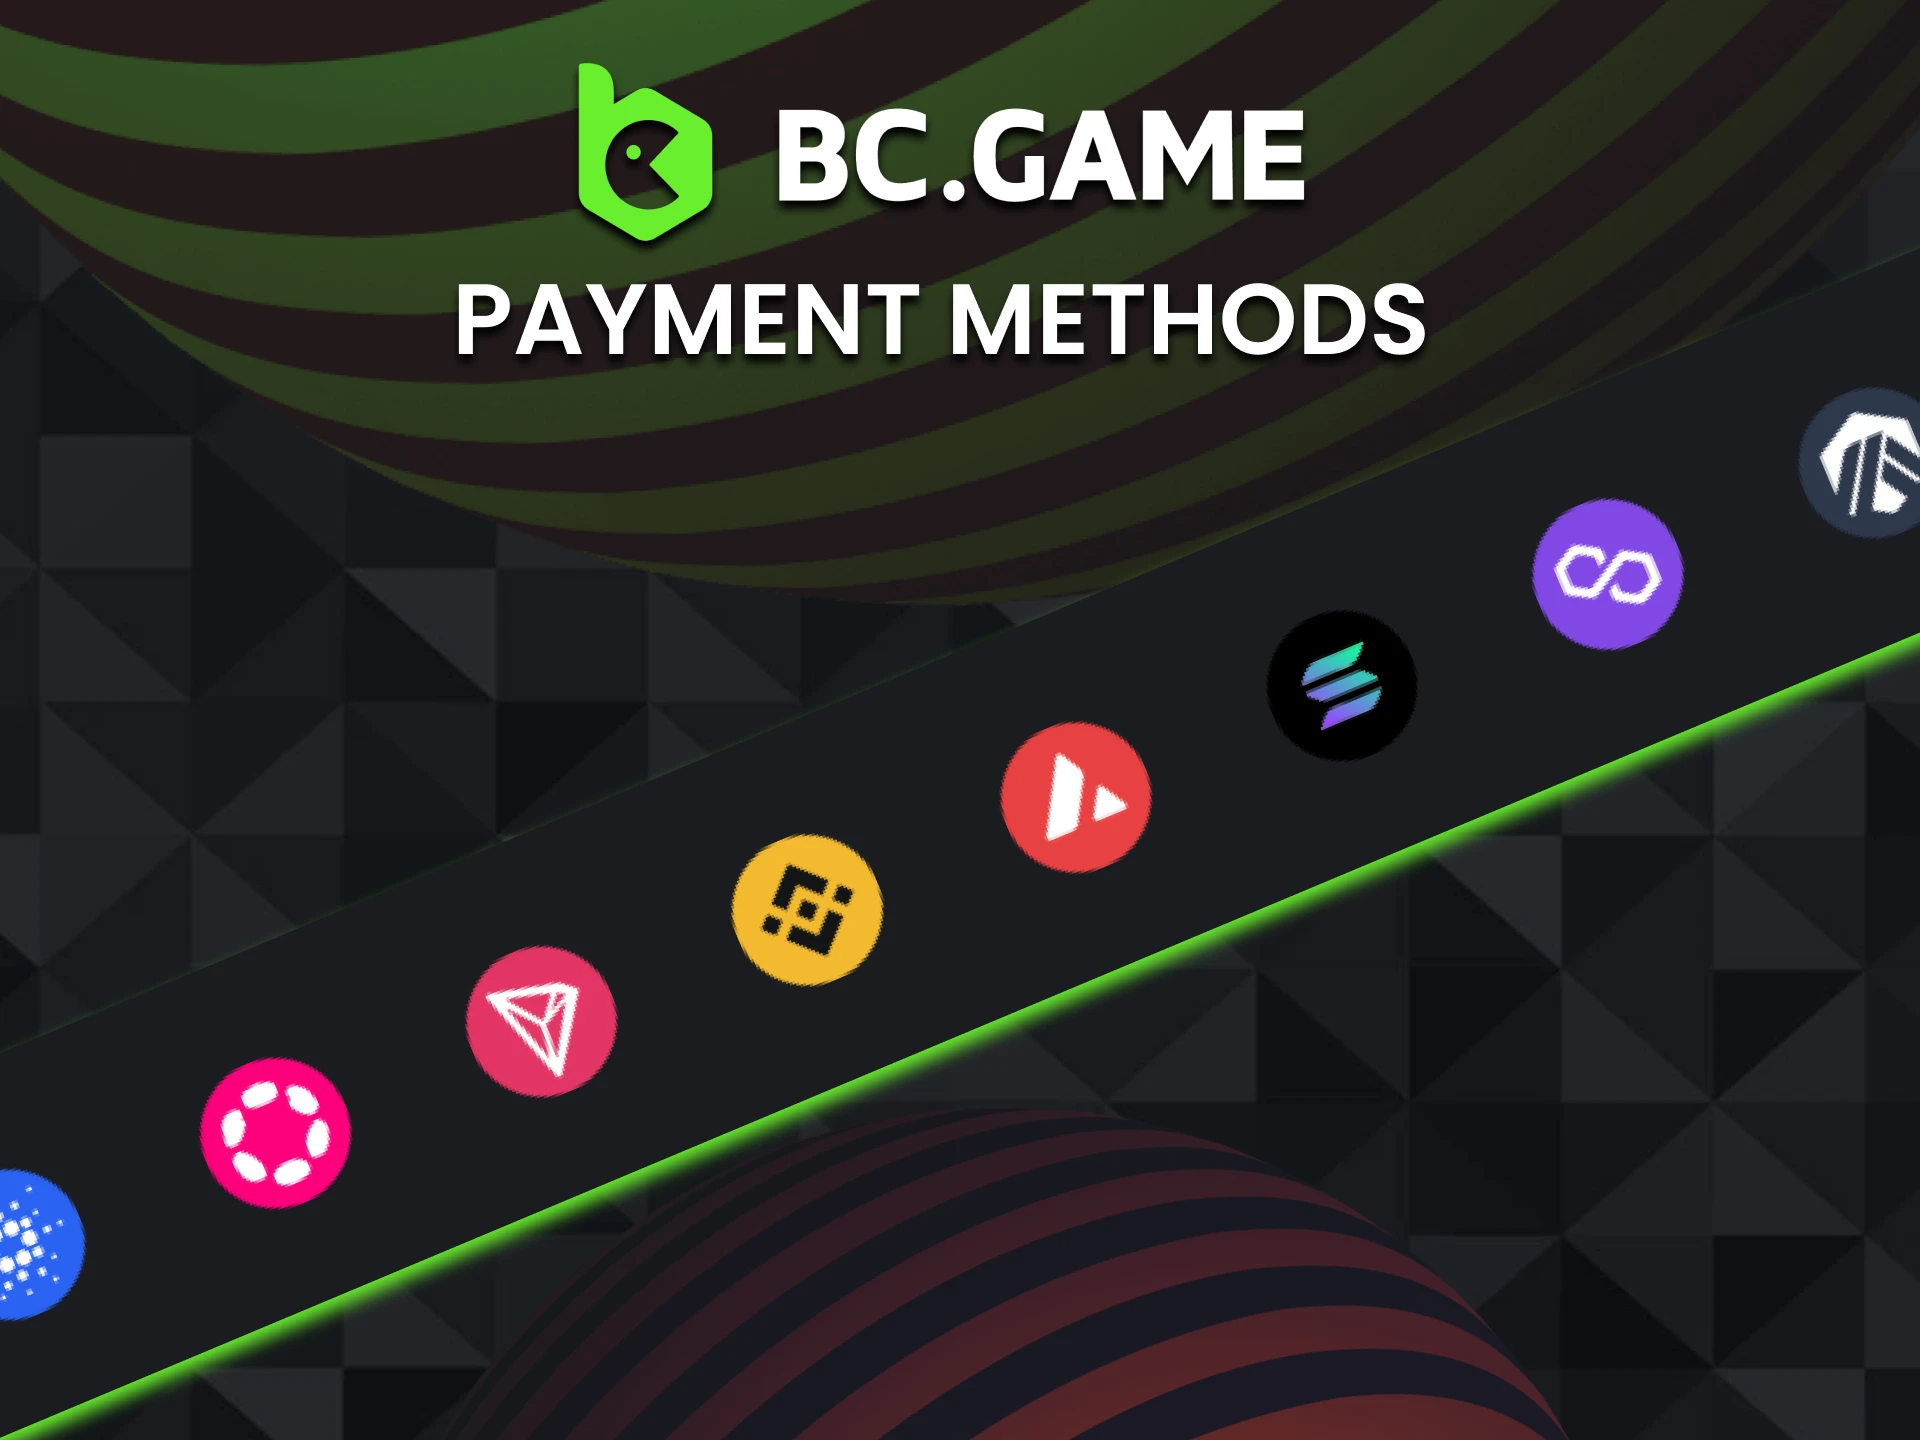 BC Game offers many popular payment options in Bangladesh.